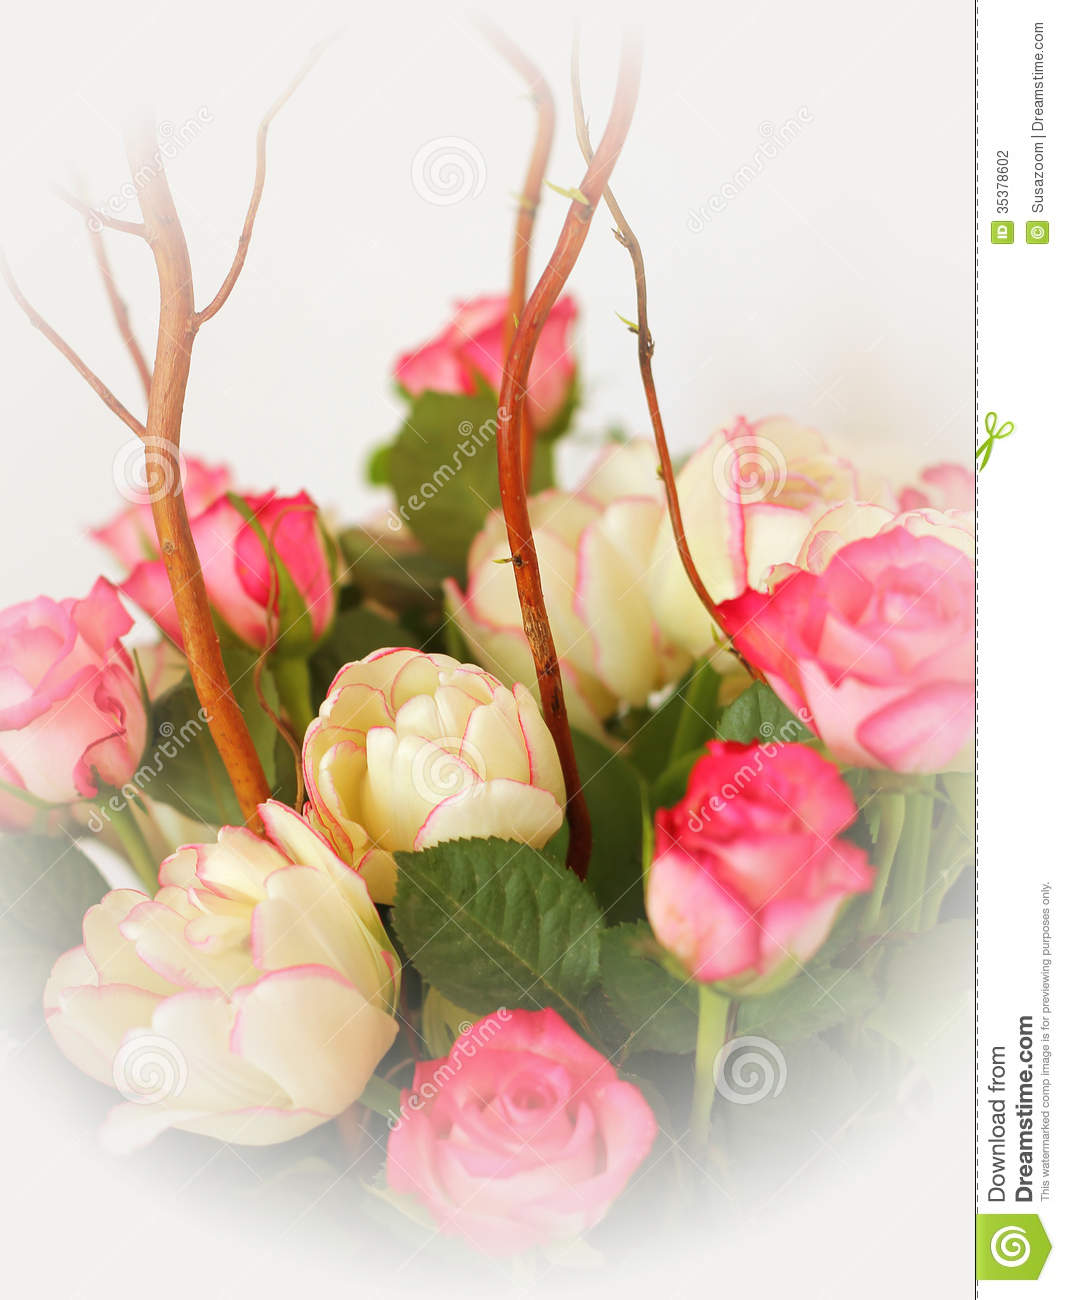 Pastel Colored Bouquet Of Roses And Tulips Stock Photography   Image    